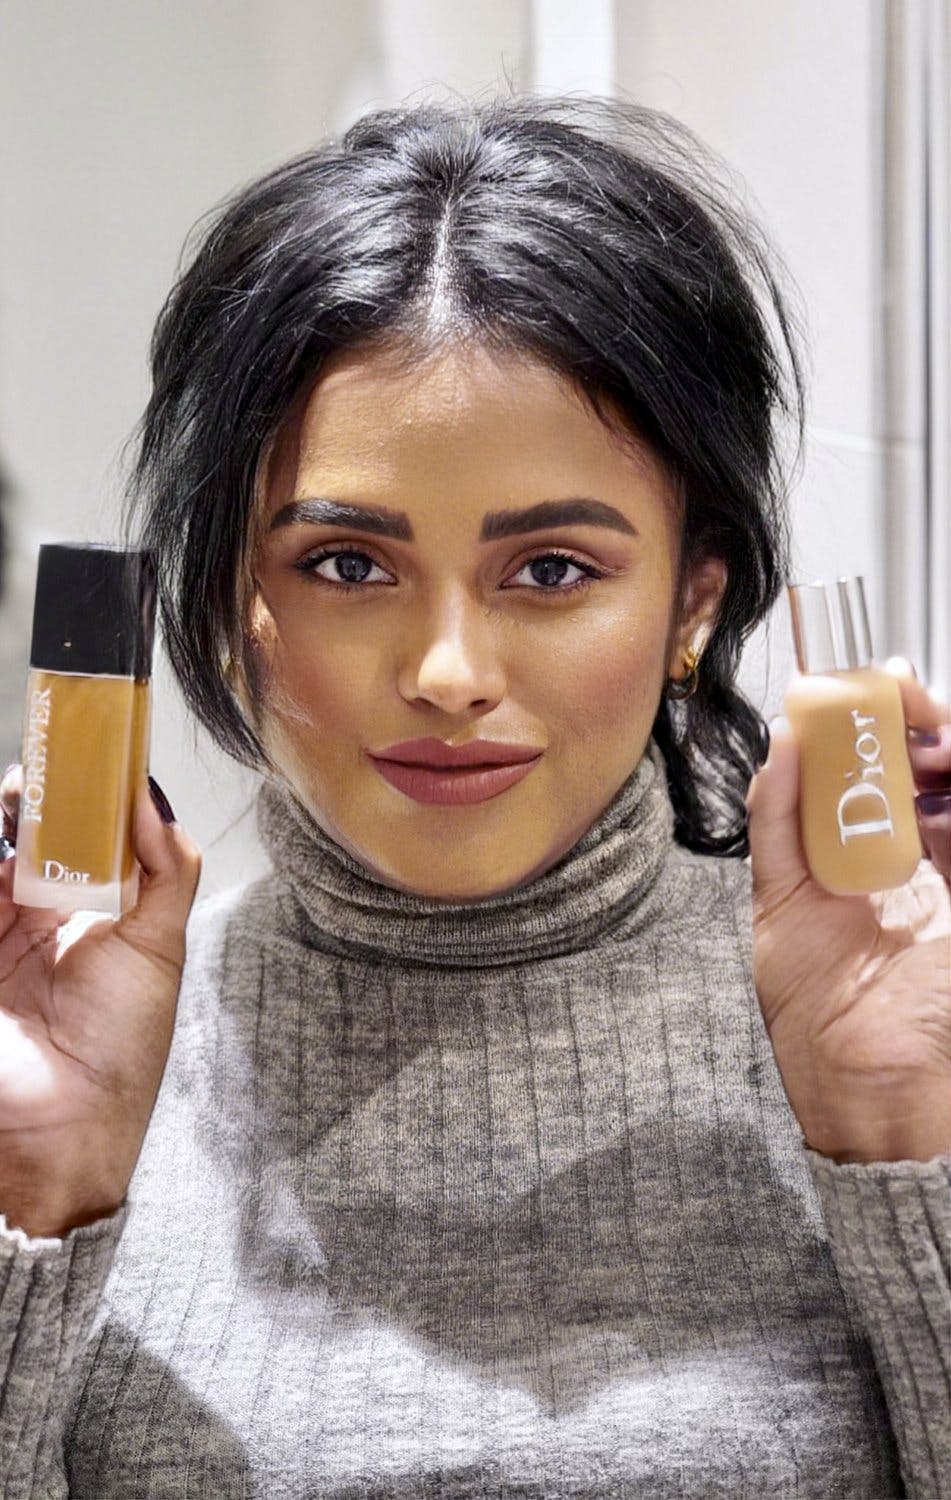 Sachini wearing Dior backstage and Dior Forever Foundations